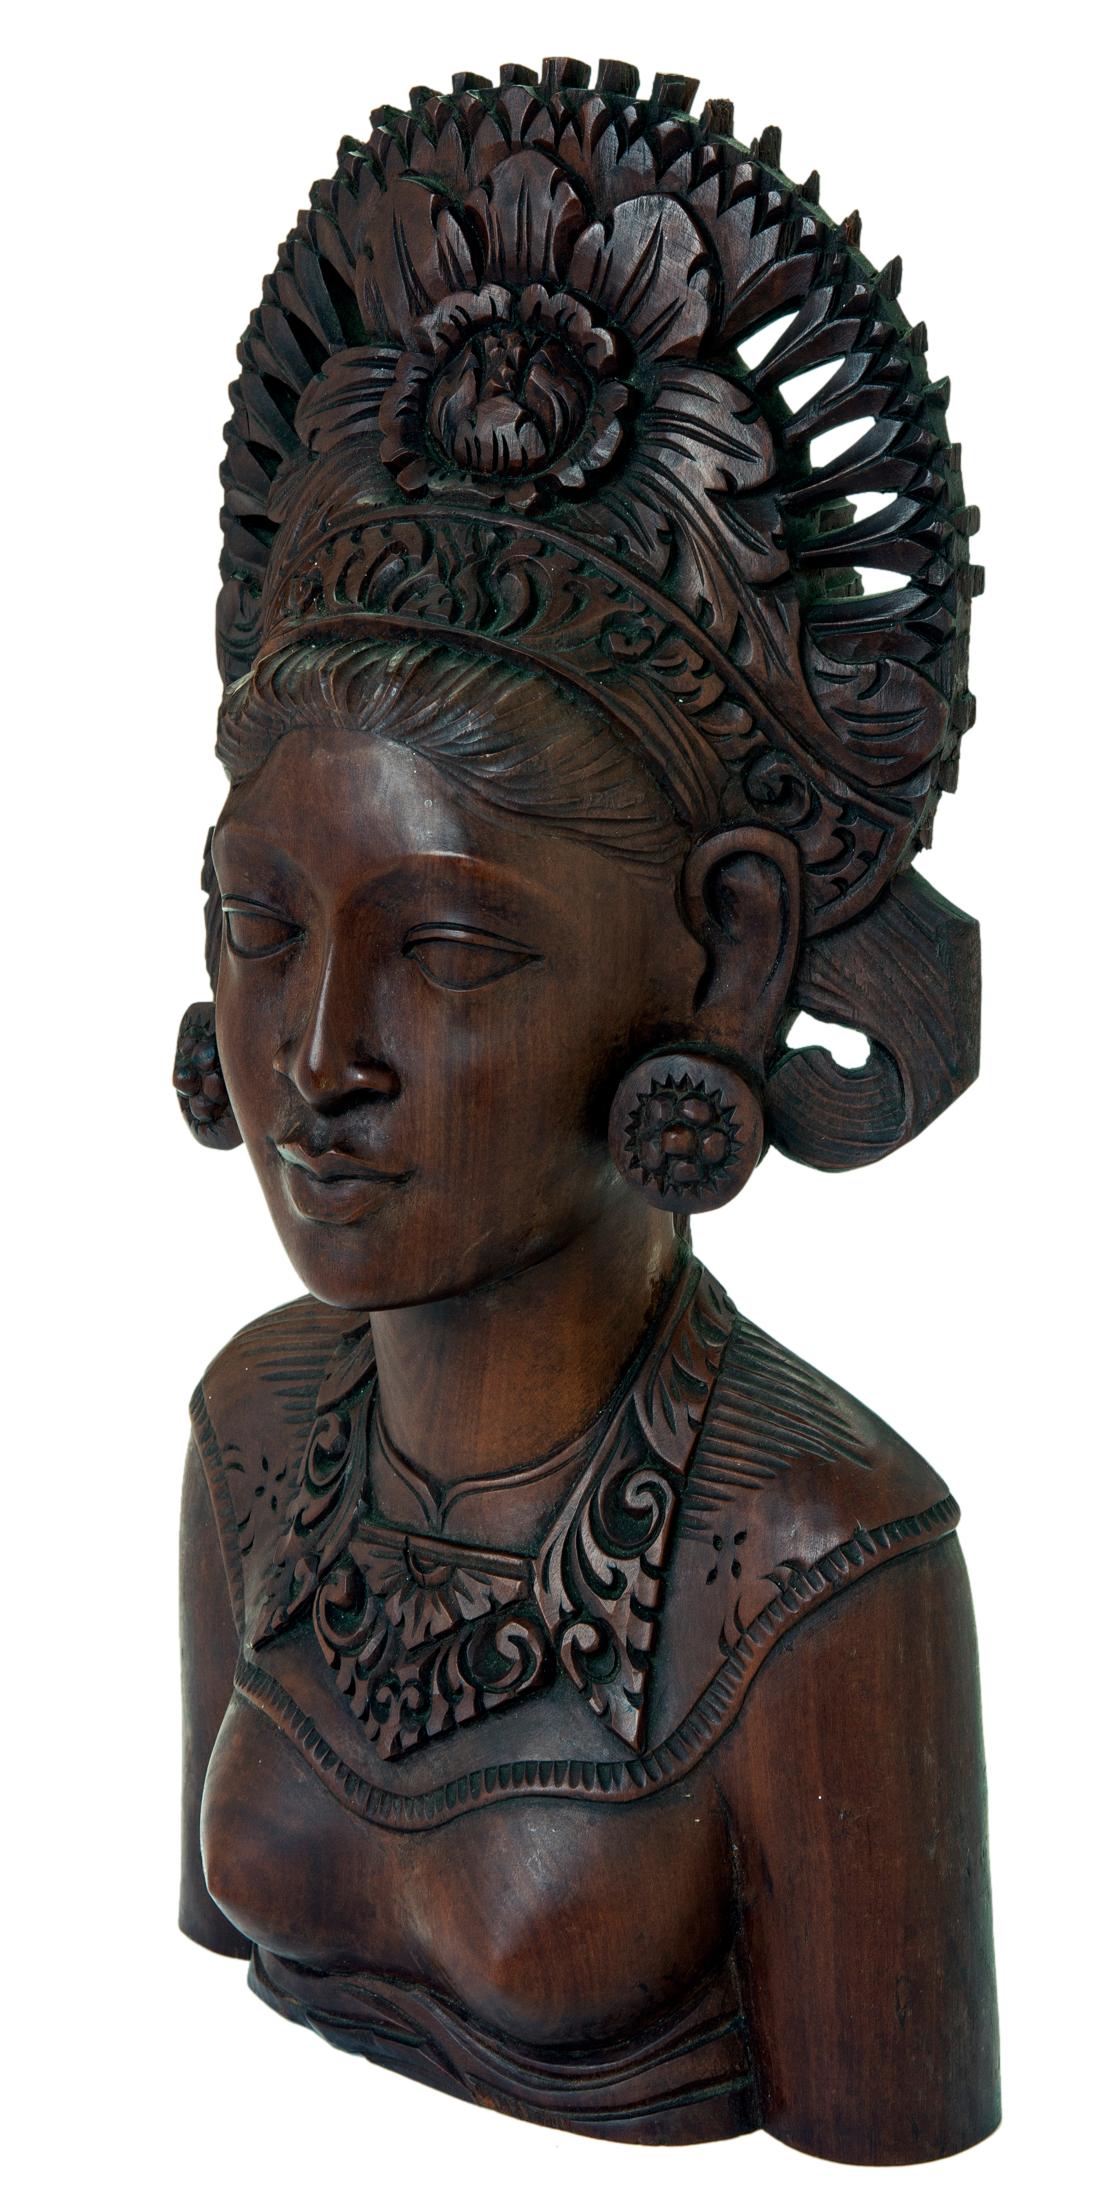 Goddess of rice and fertility, still widely worshiped in some areas of the world. Her giant reticulated crown features a large carved flower medallion and swirling floral neck breastplate. She wears round earrings decorate with a concentric flower